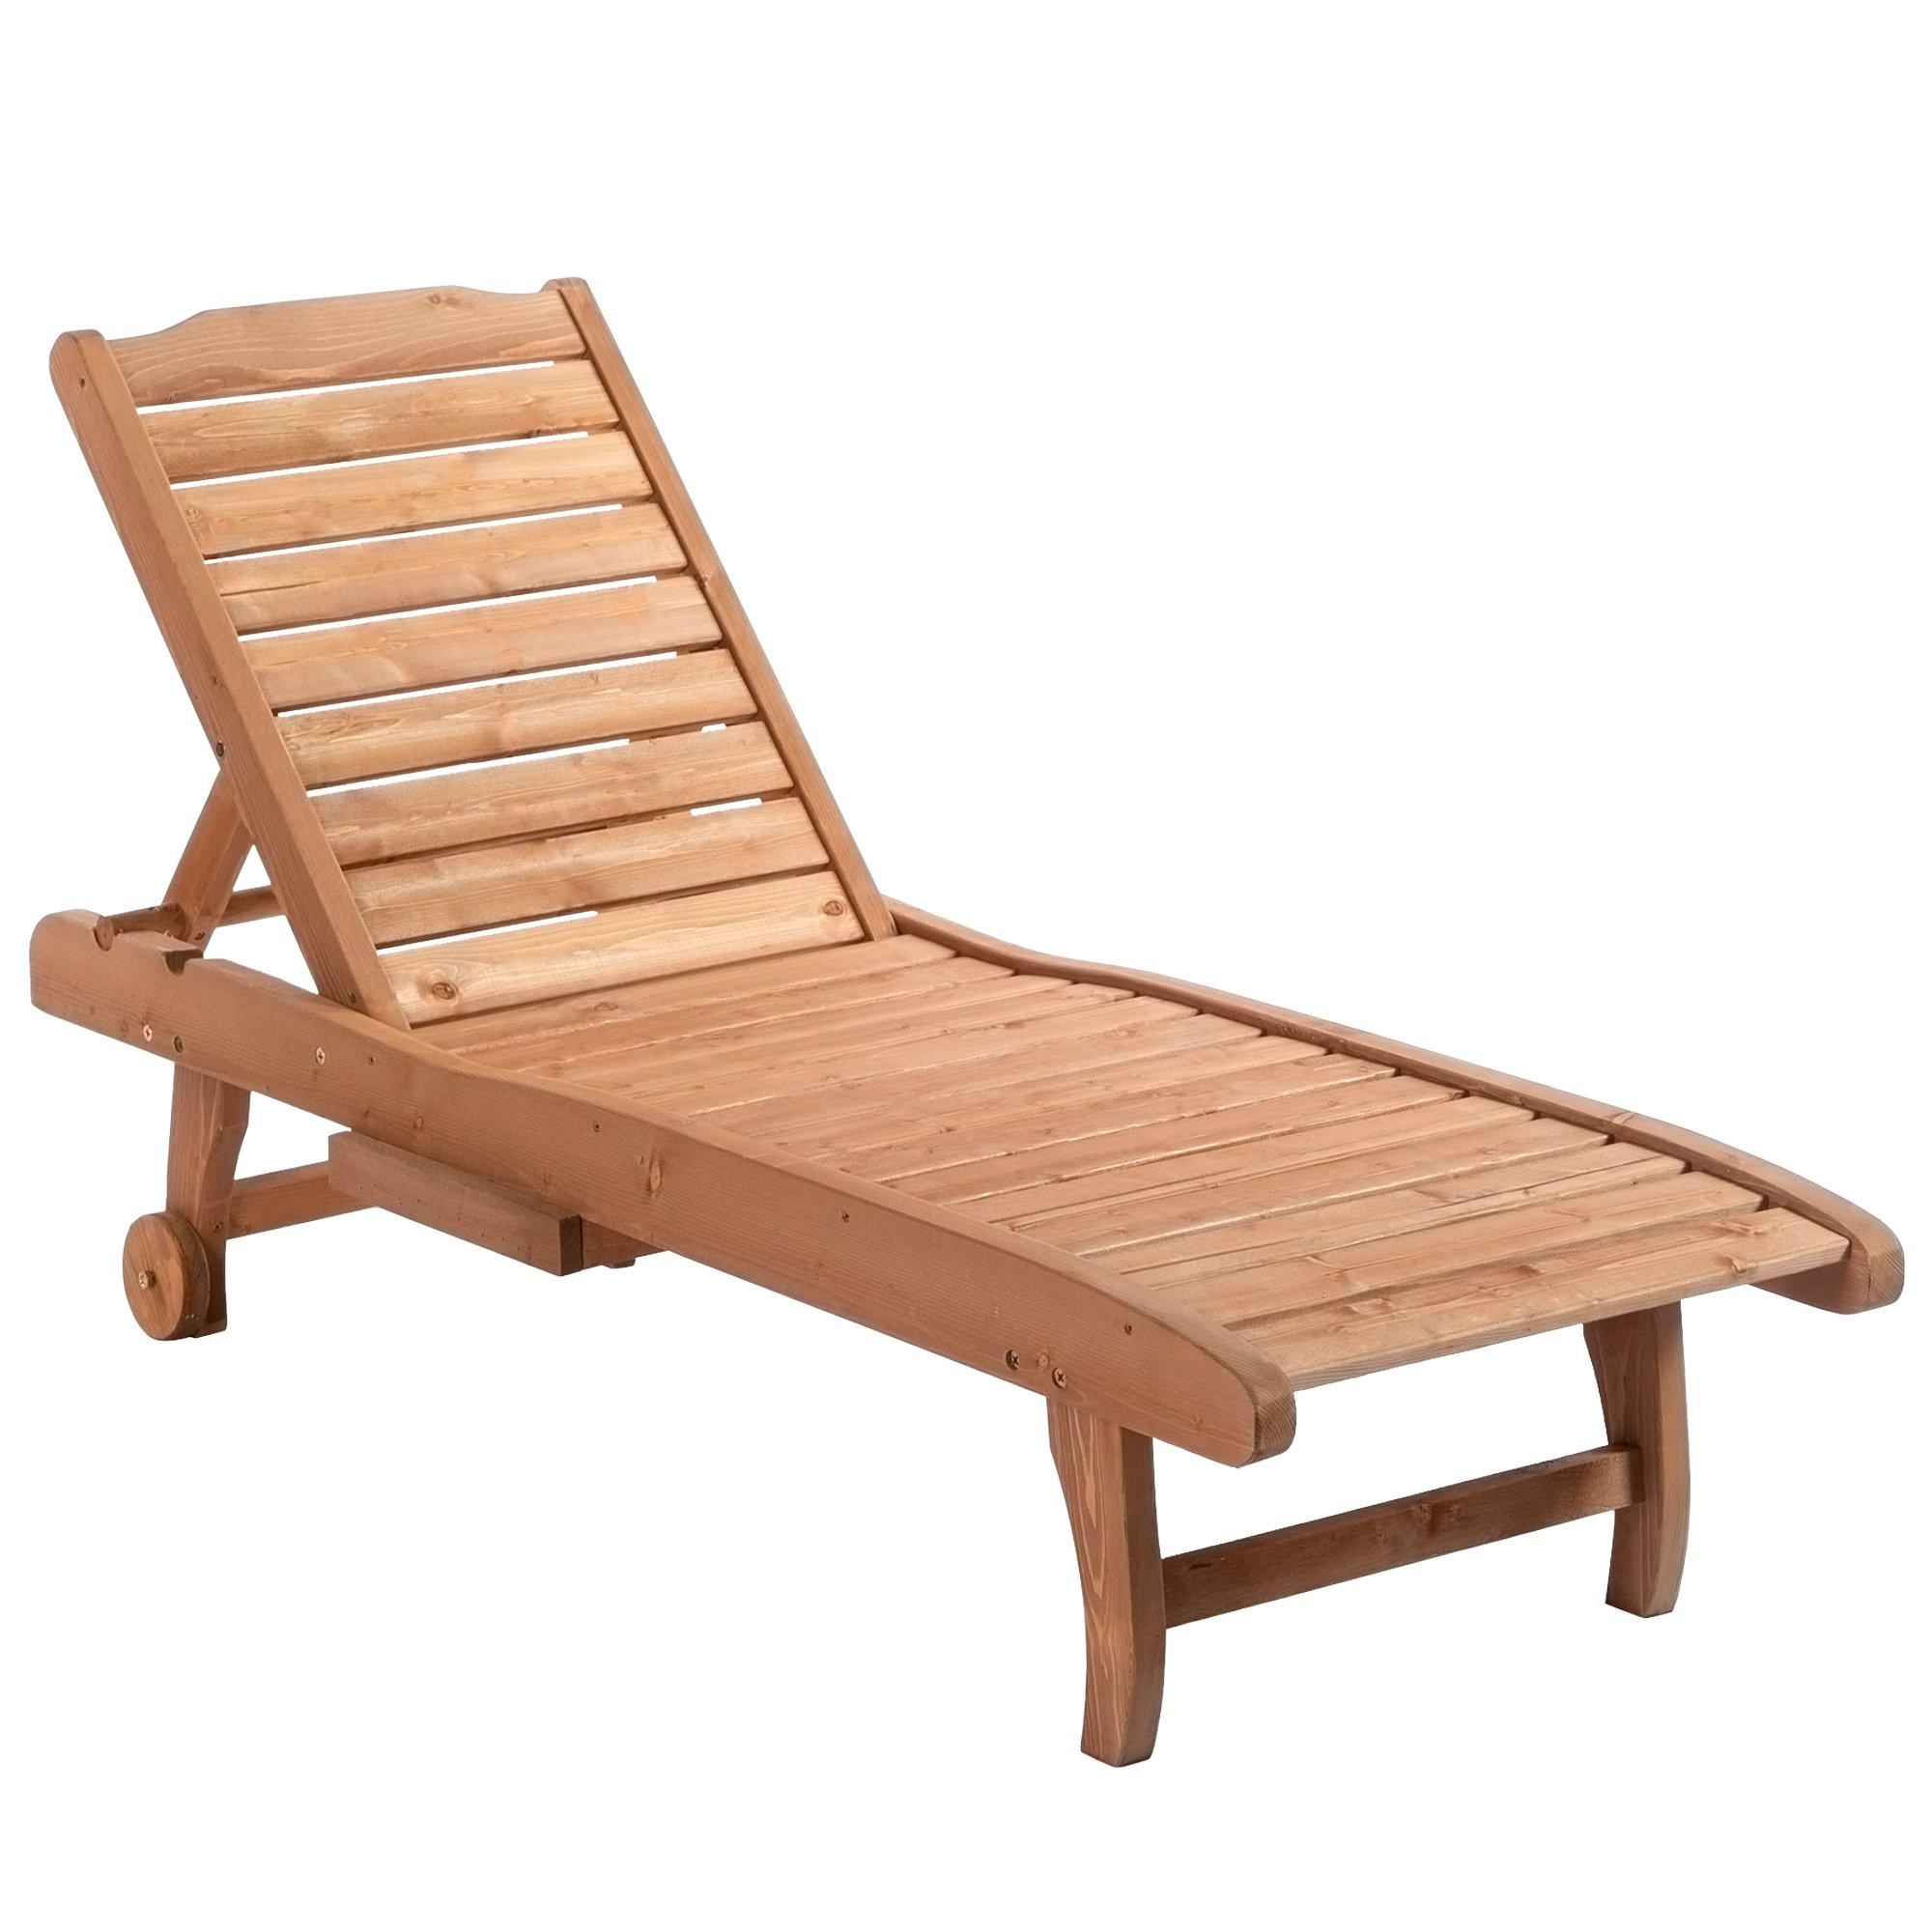 Wooden Sun Lounger Outdoor Patio Sun Bed Adjustable with Pull-out Table